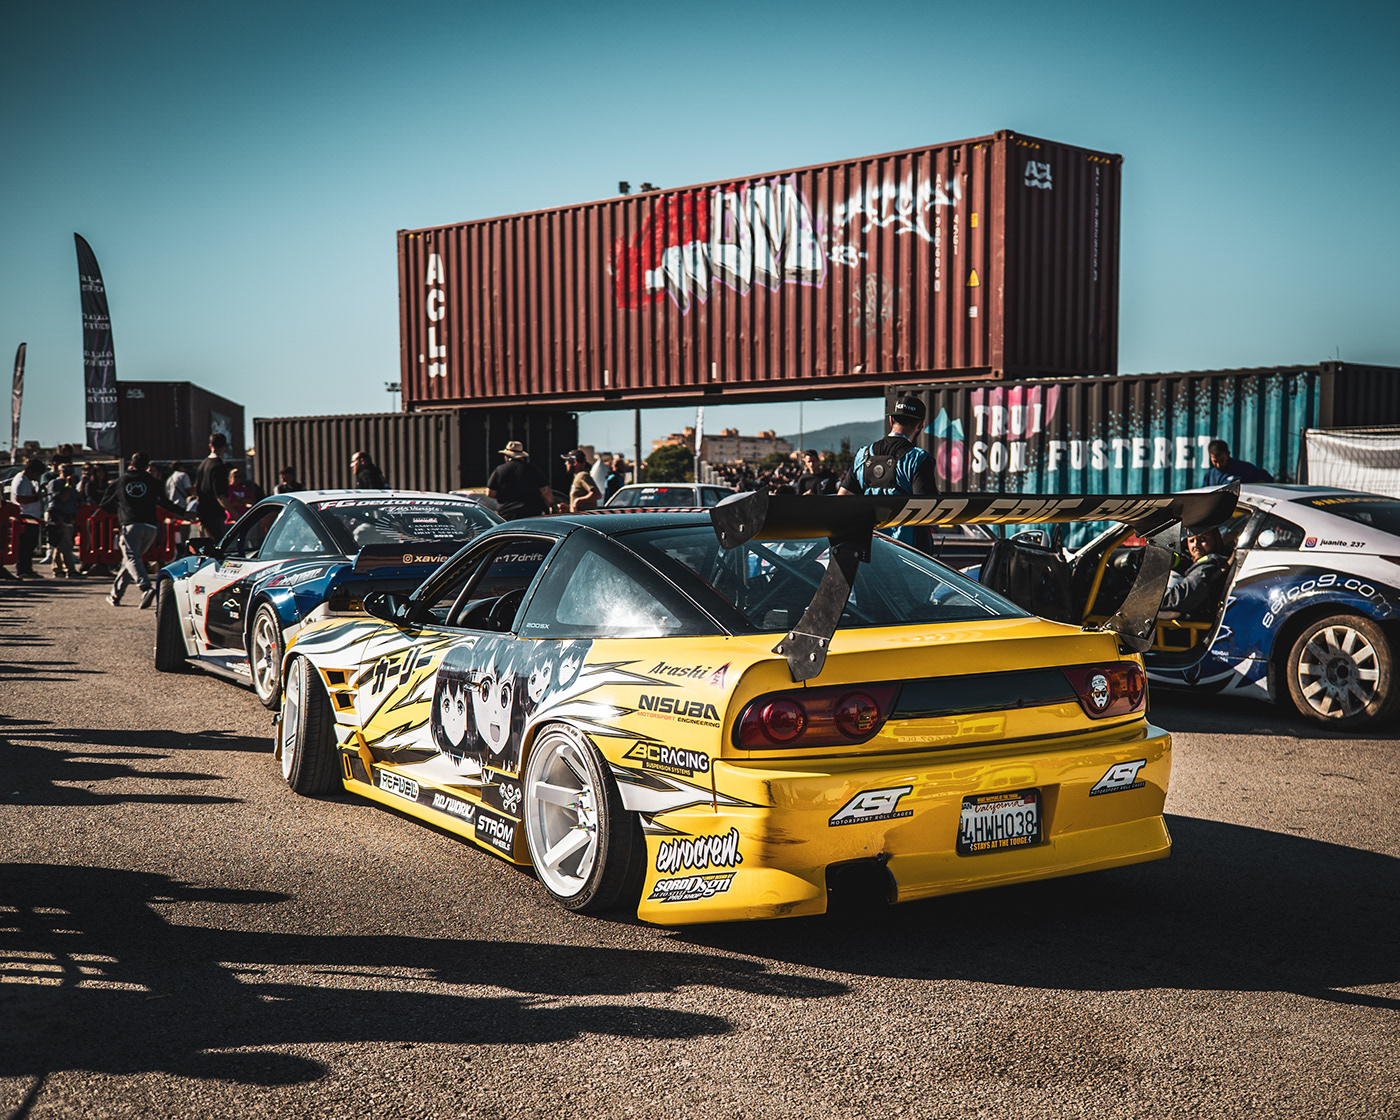 needforspeed nfs car Nissan nissan180sx comercial vibes yellow White desing container drift race tuner tuned